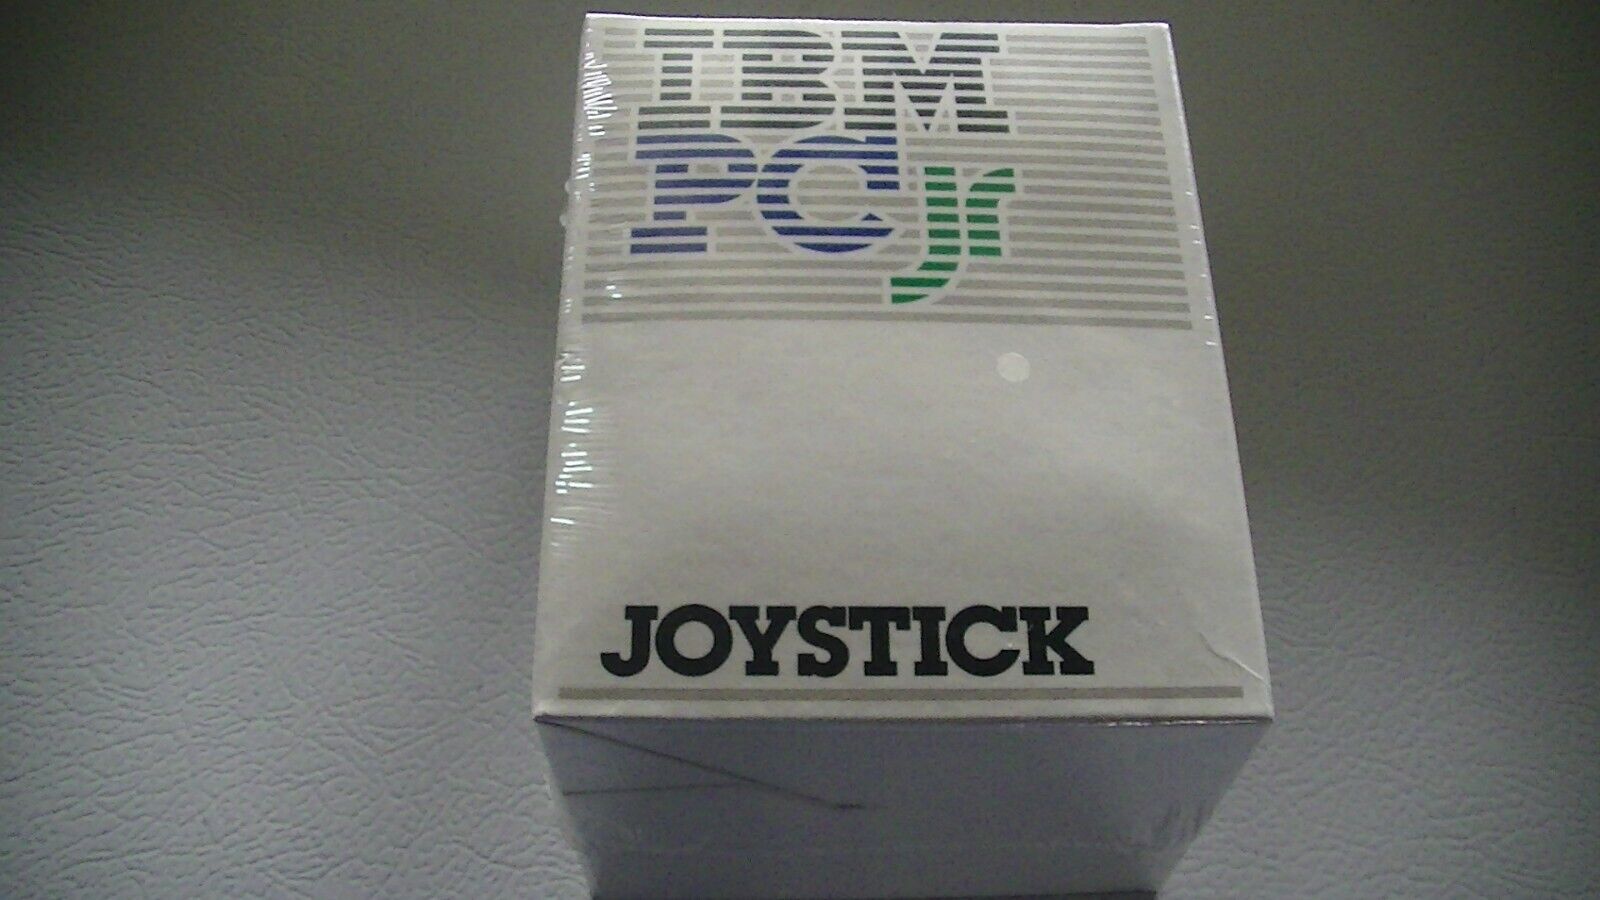 IBM PC jr Joystick  Computer Controller  or Tandy Color Computer by cord change